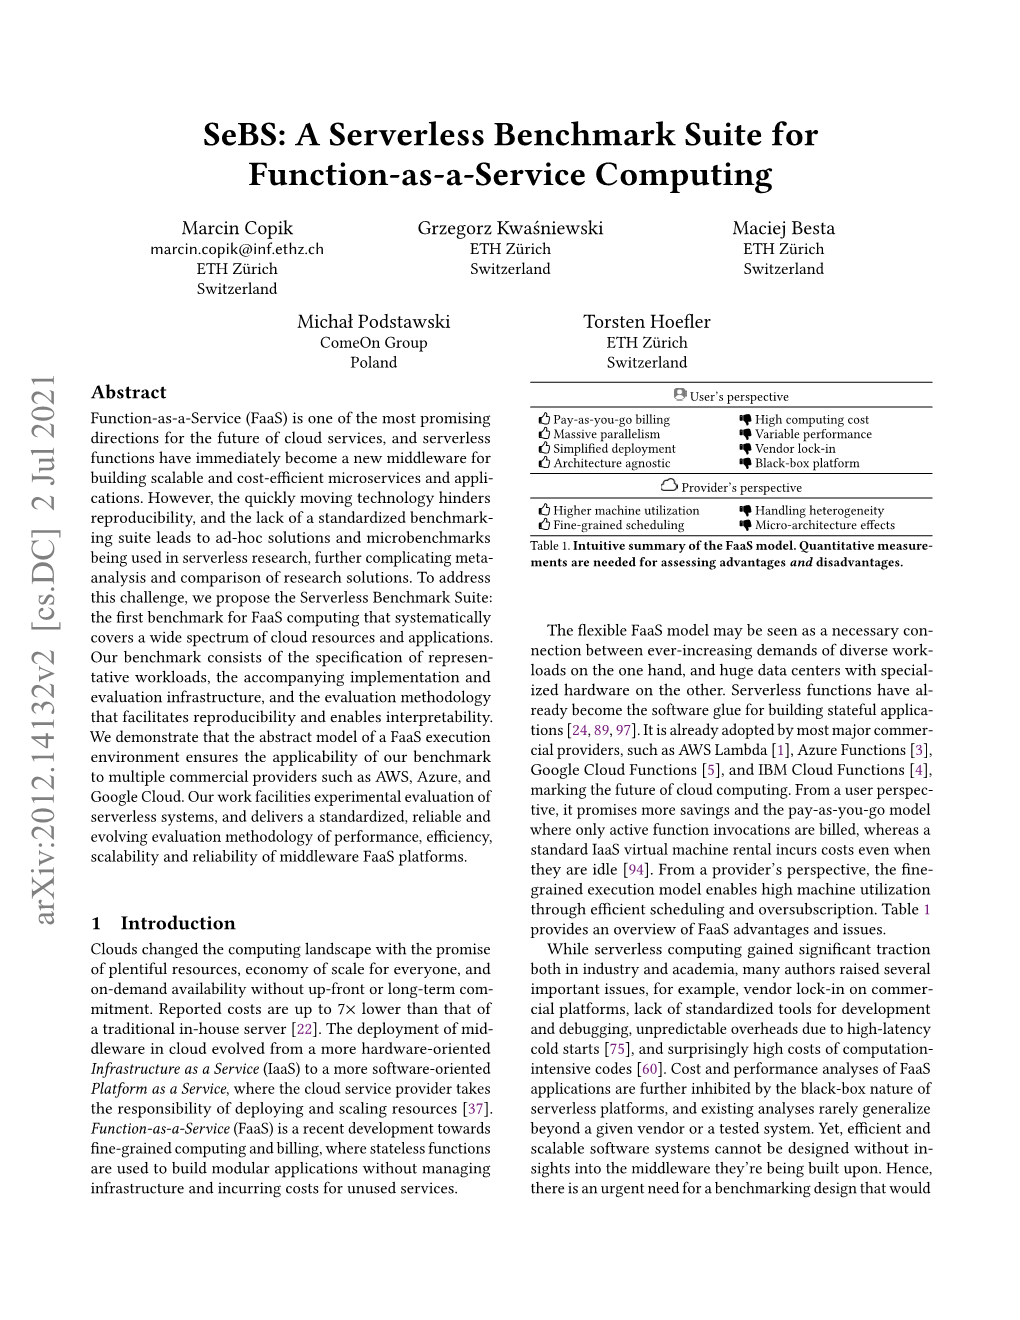 A Serverless Benchmark Suite for Function-As-A-Service Computing